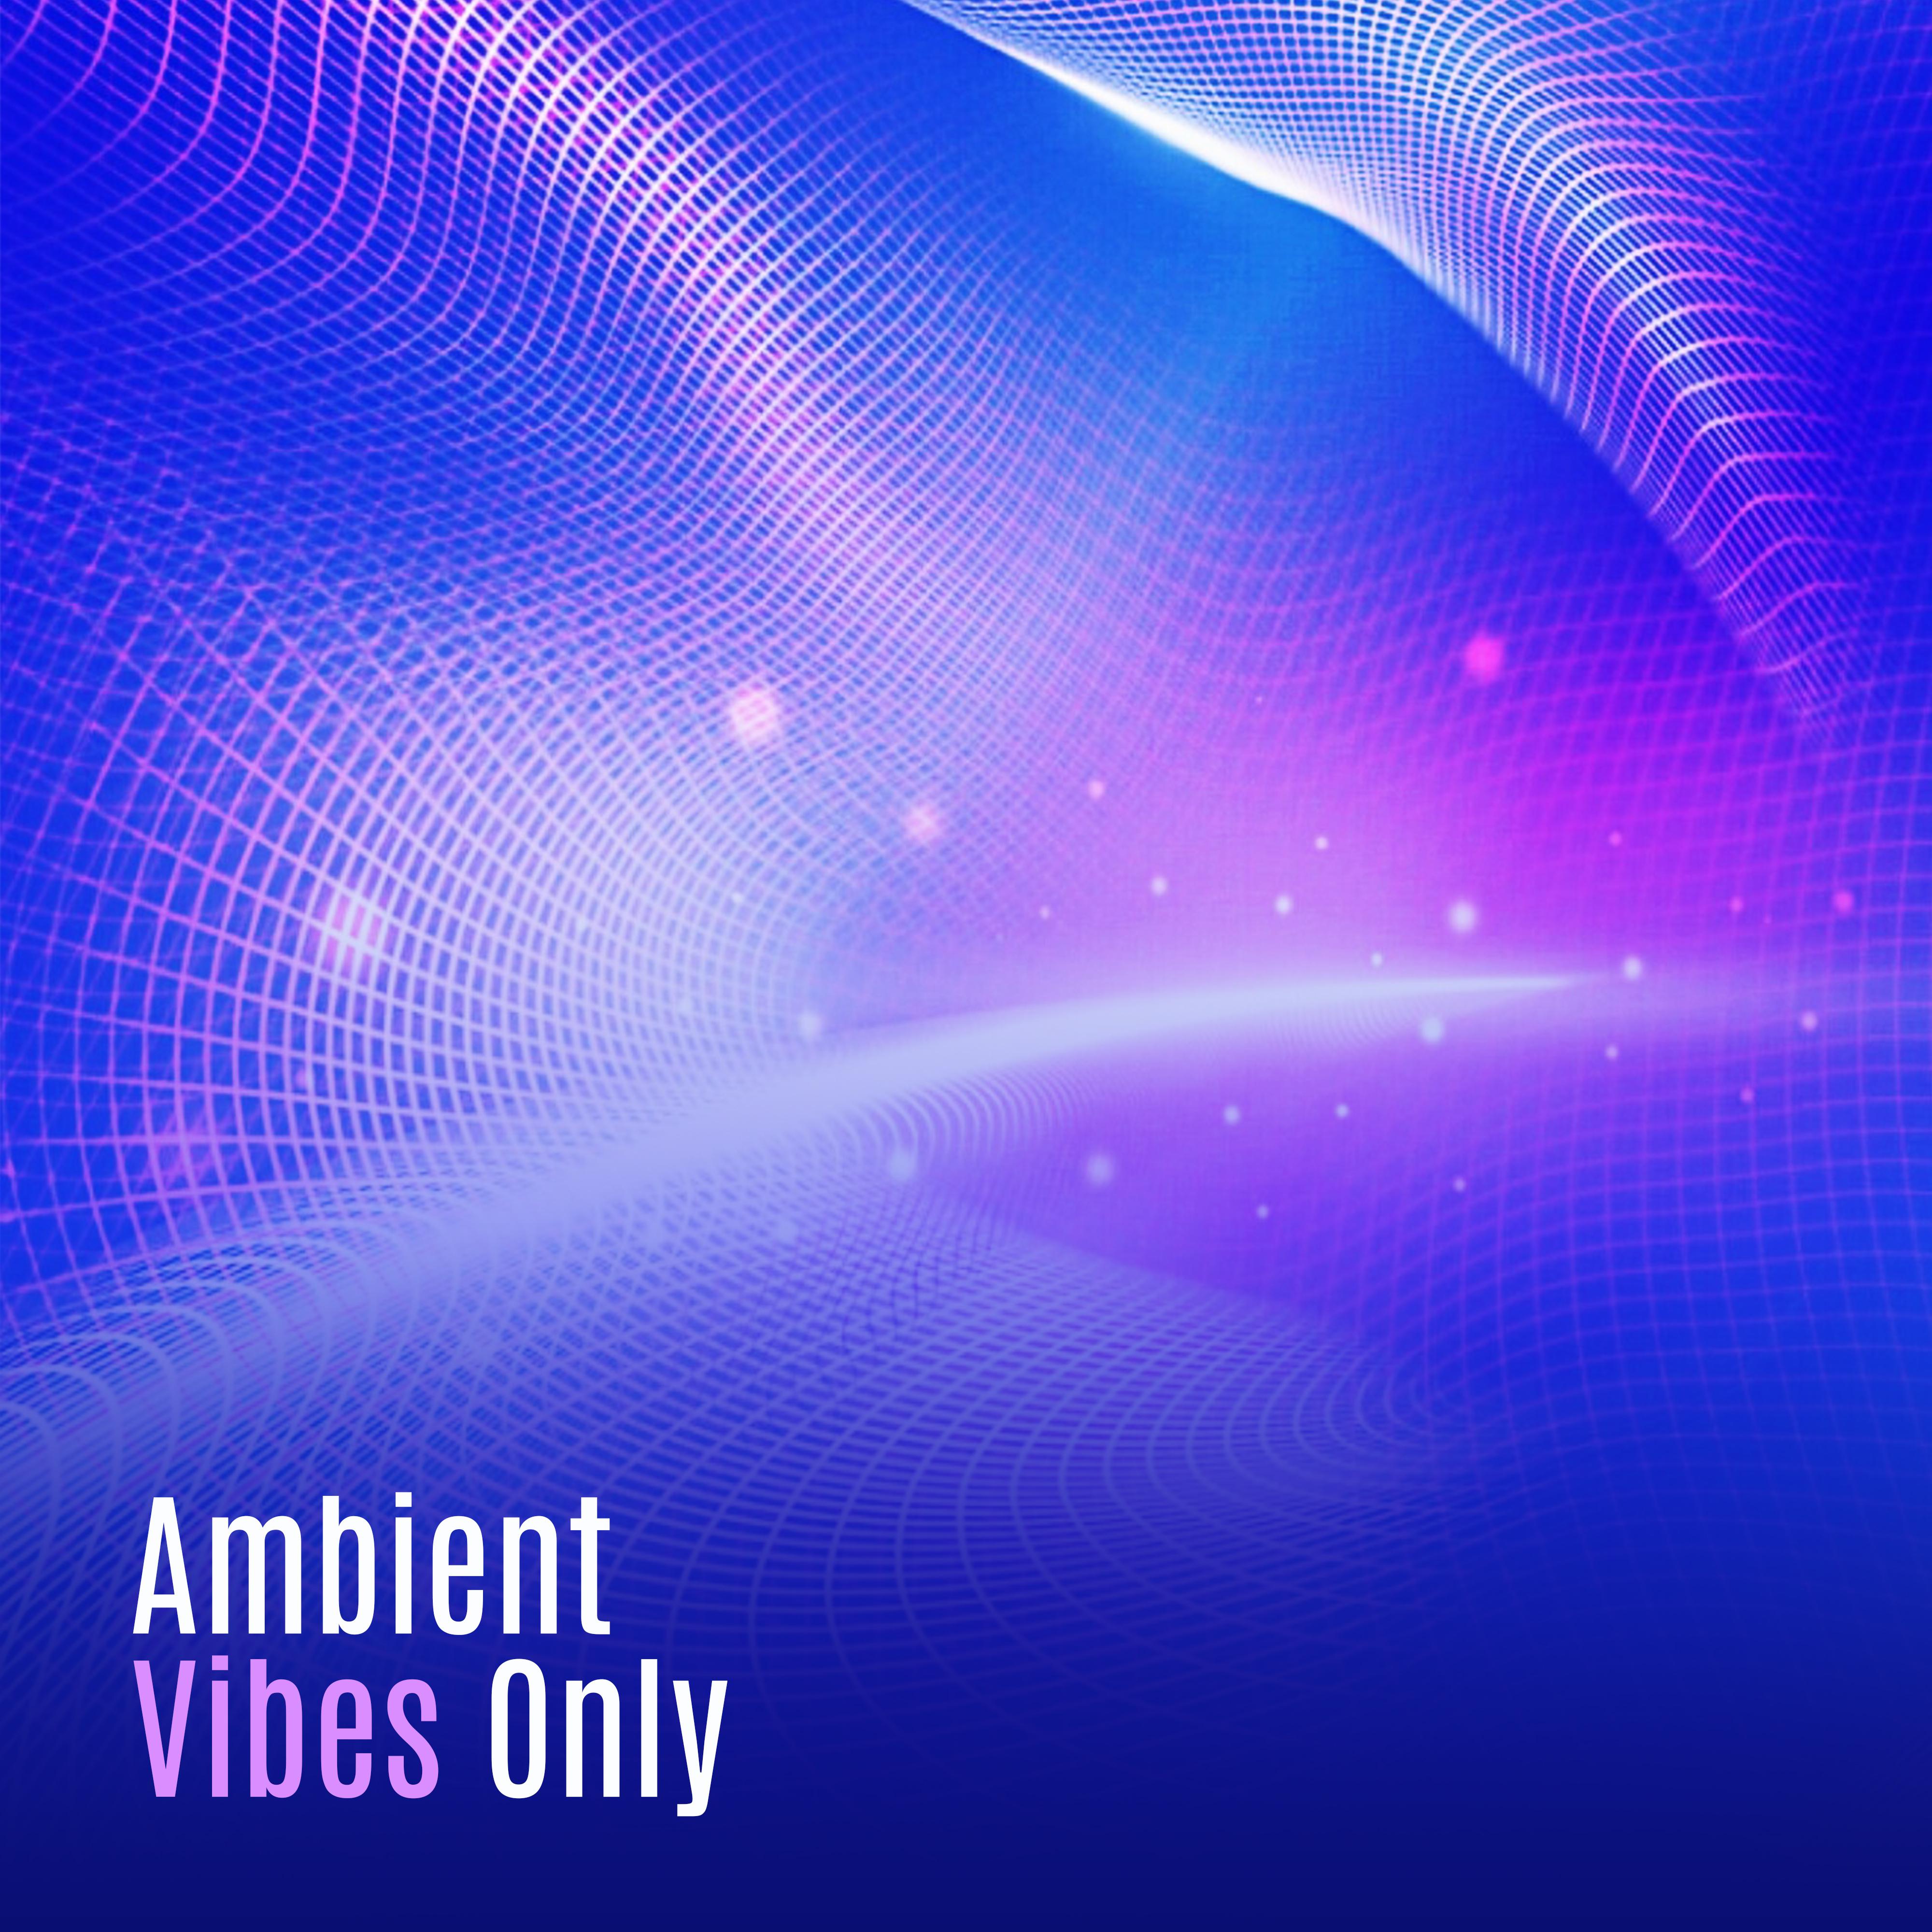 Ambient Vibes Only – New Chillout Music, Eletronic Beats, Trance, Downbeats Lounge, Summer 2017